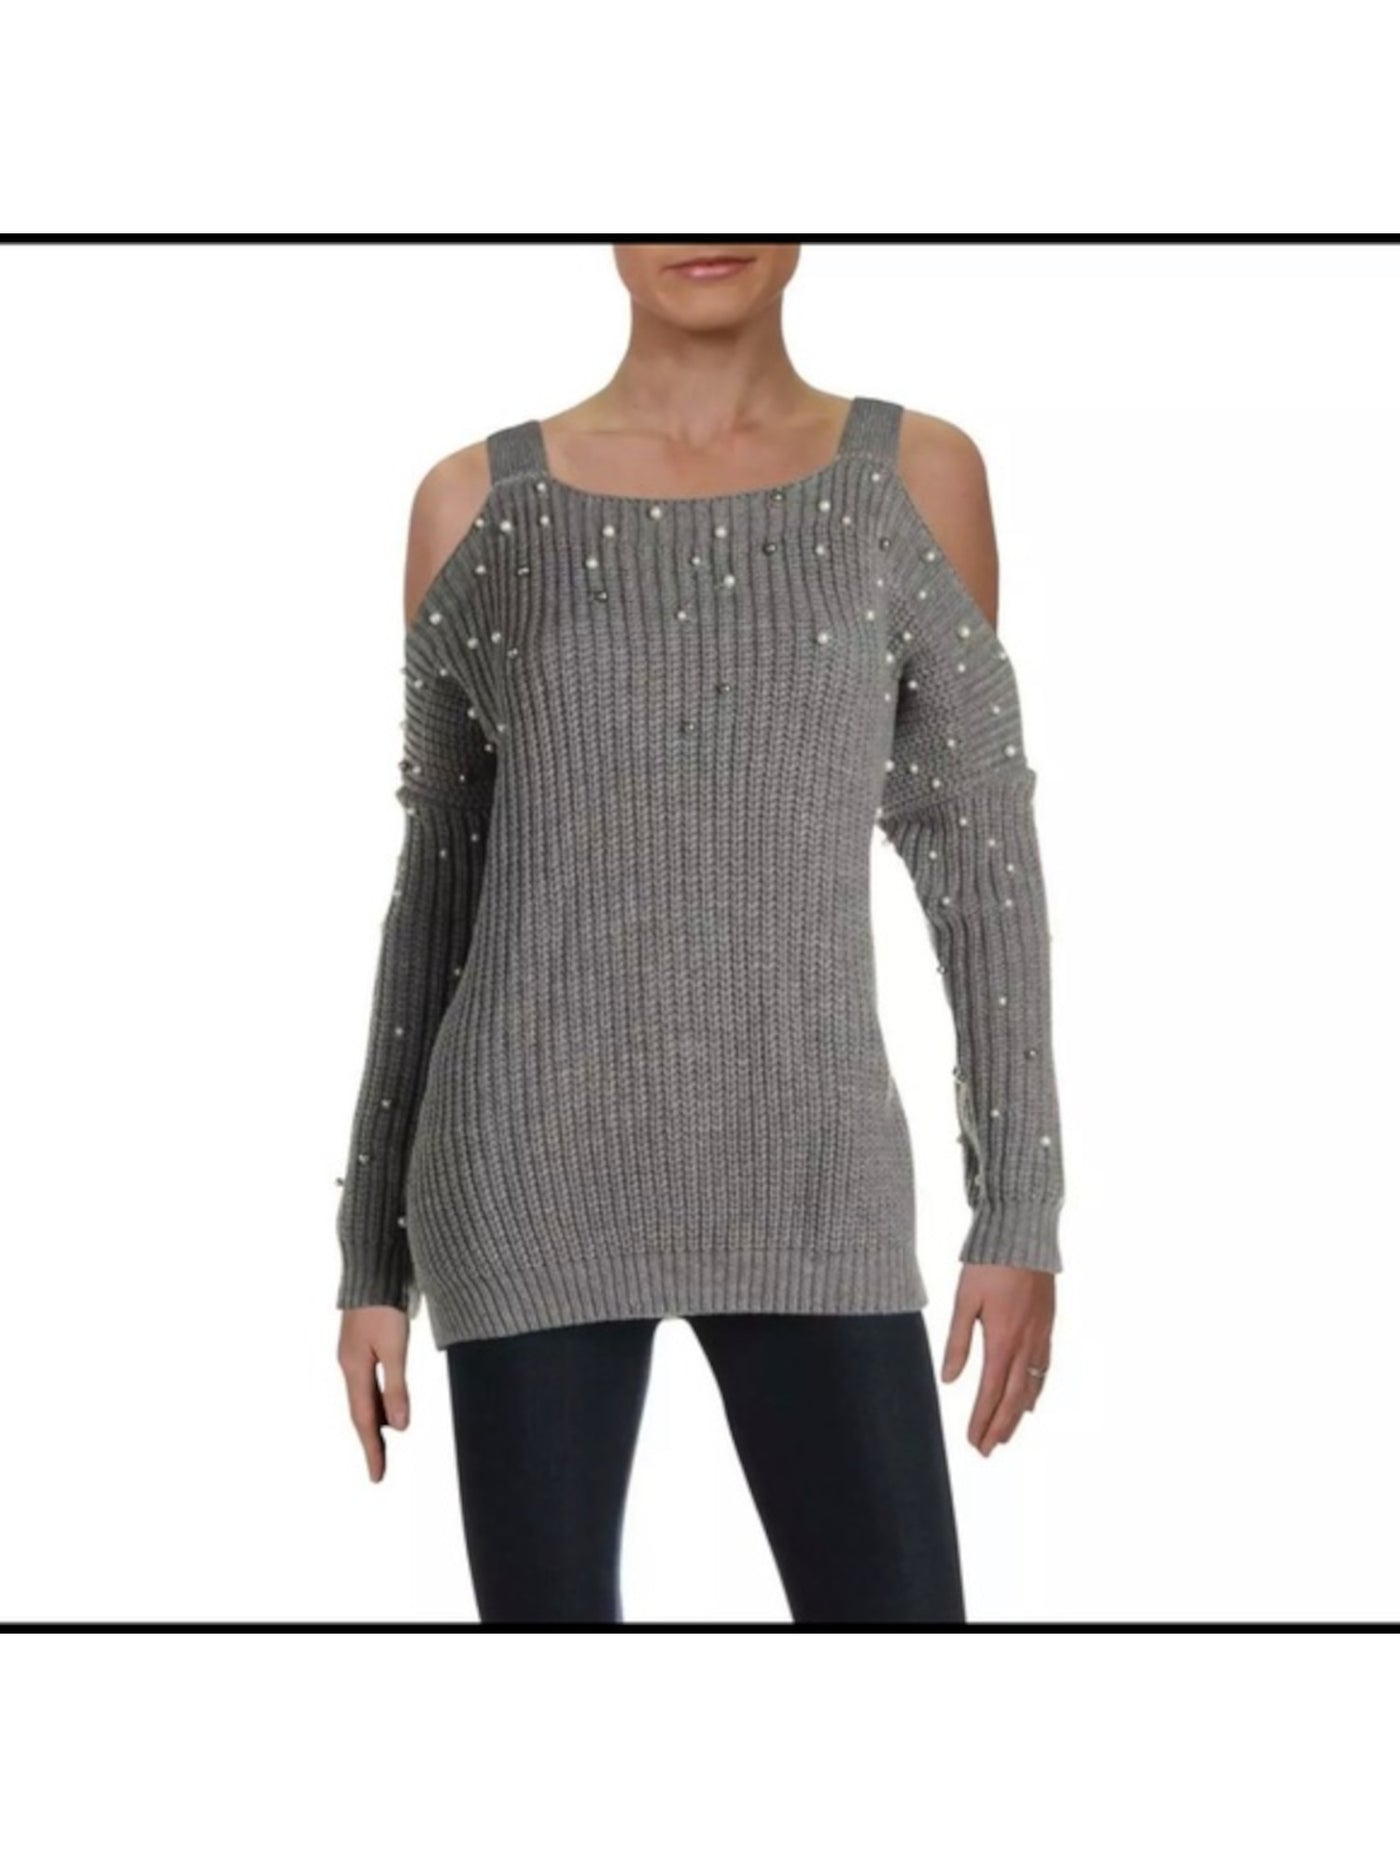 ELAN Womens Gray Cold Shoulder Embroidered Long Sleeve Square Neck Sweater L